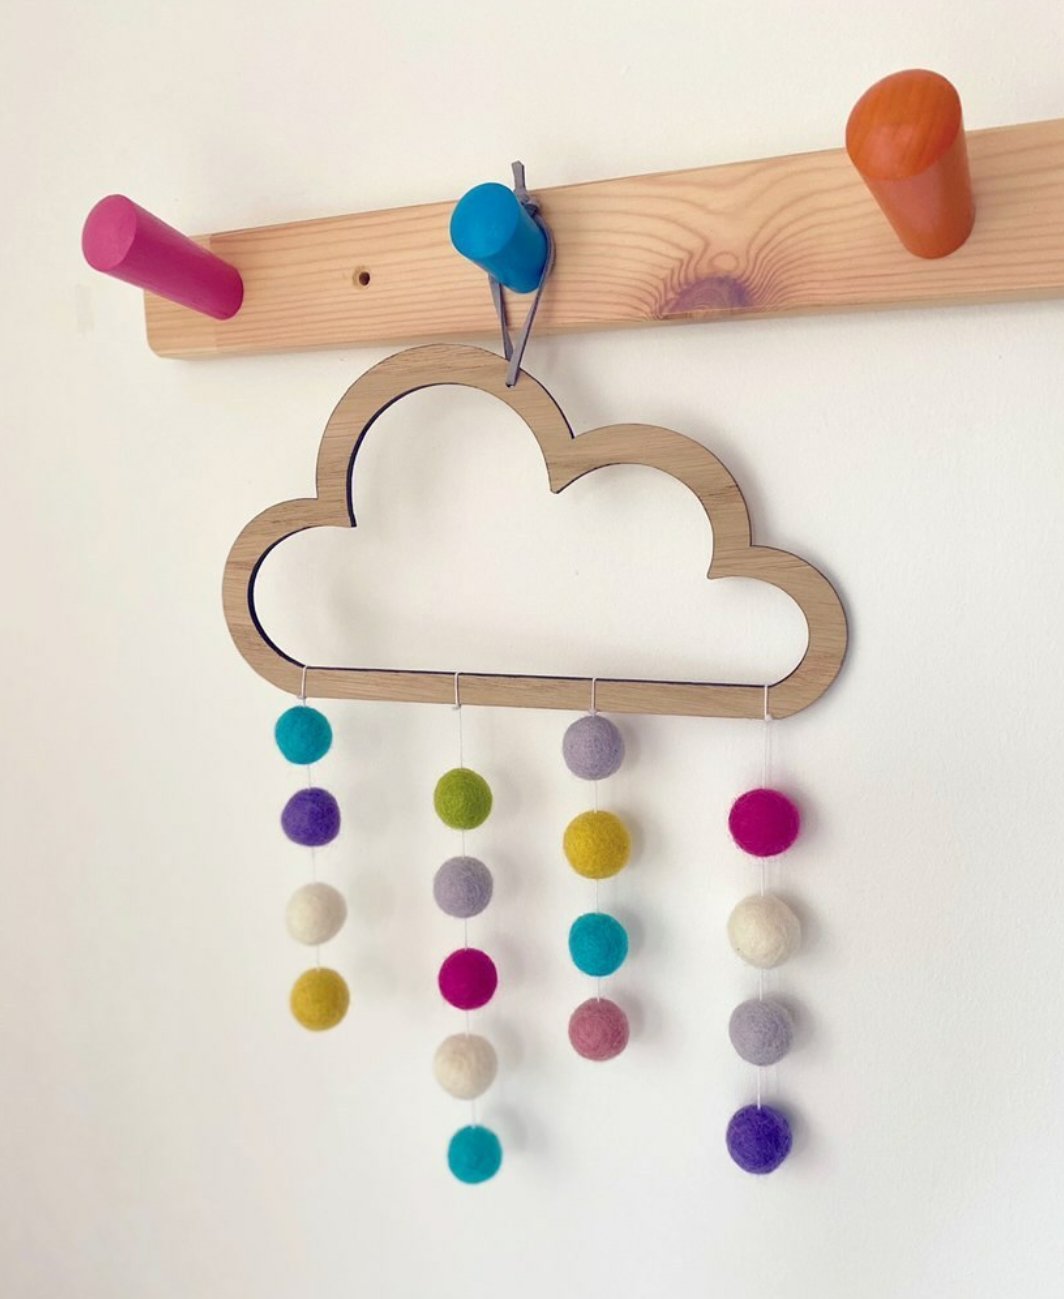 Pompom Rainbow Cloud Mobile stocked in Nottinghams Children’s Shop perfect decor for your little ones room. It also makes a beautiful new baby gift 